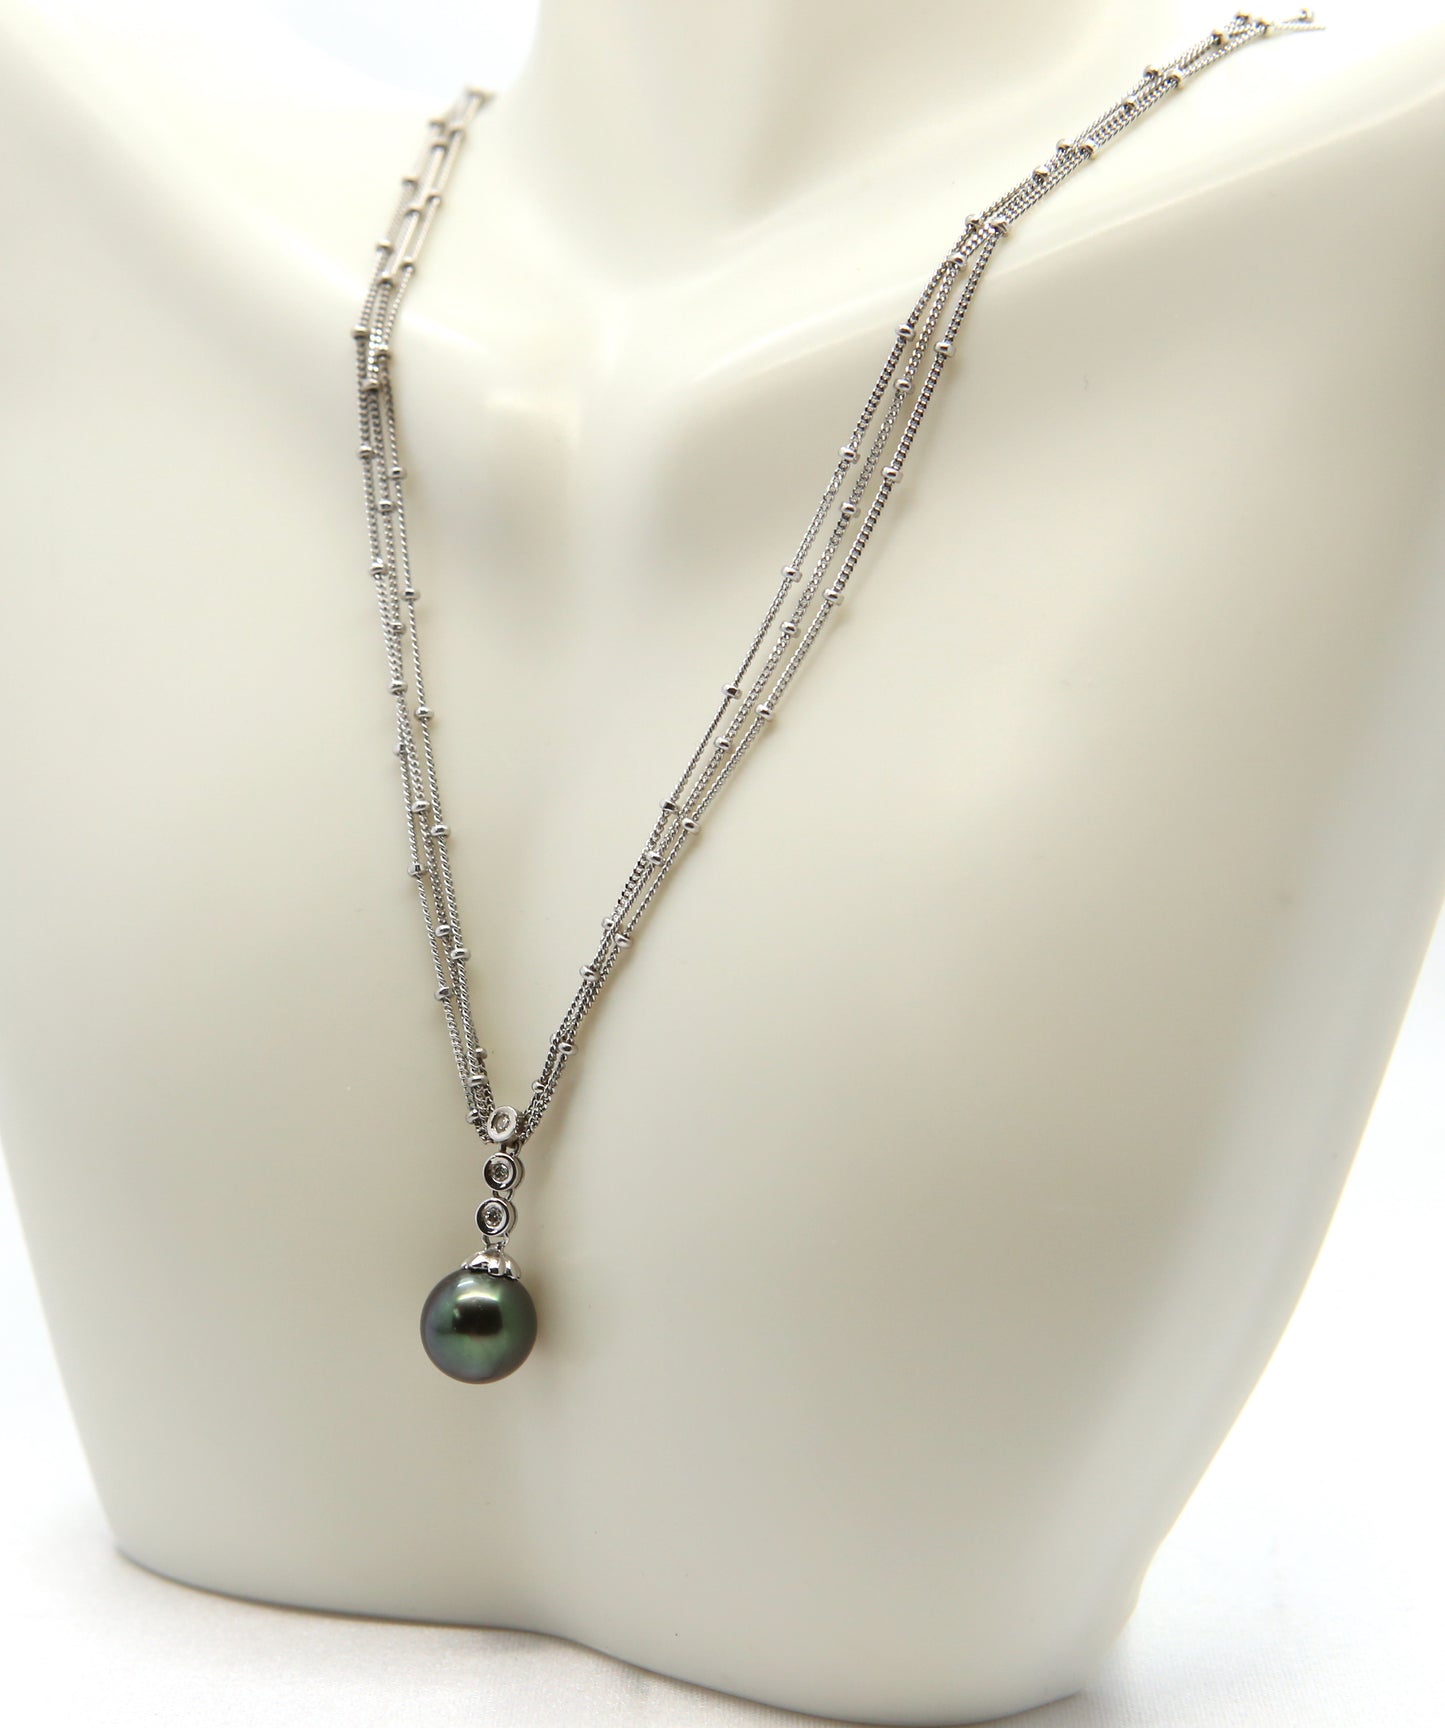 Estate 14k White Gold Tahitian Pearl & Diamond Necklace, 16.75 inches - 8.1g